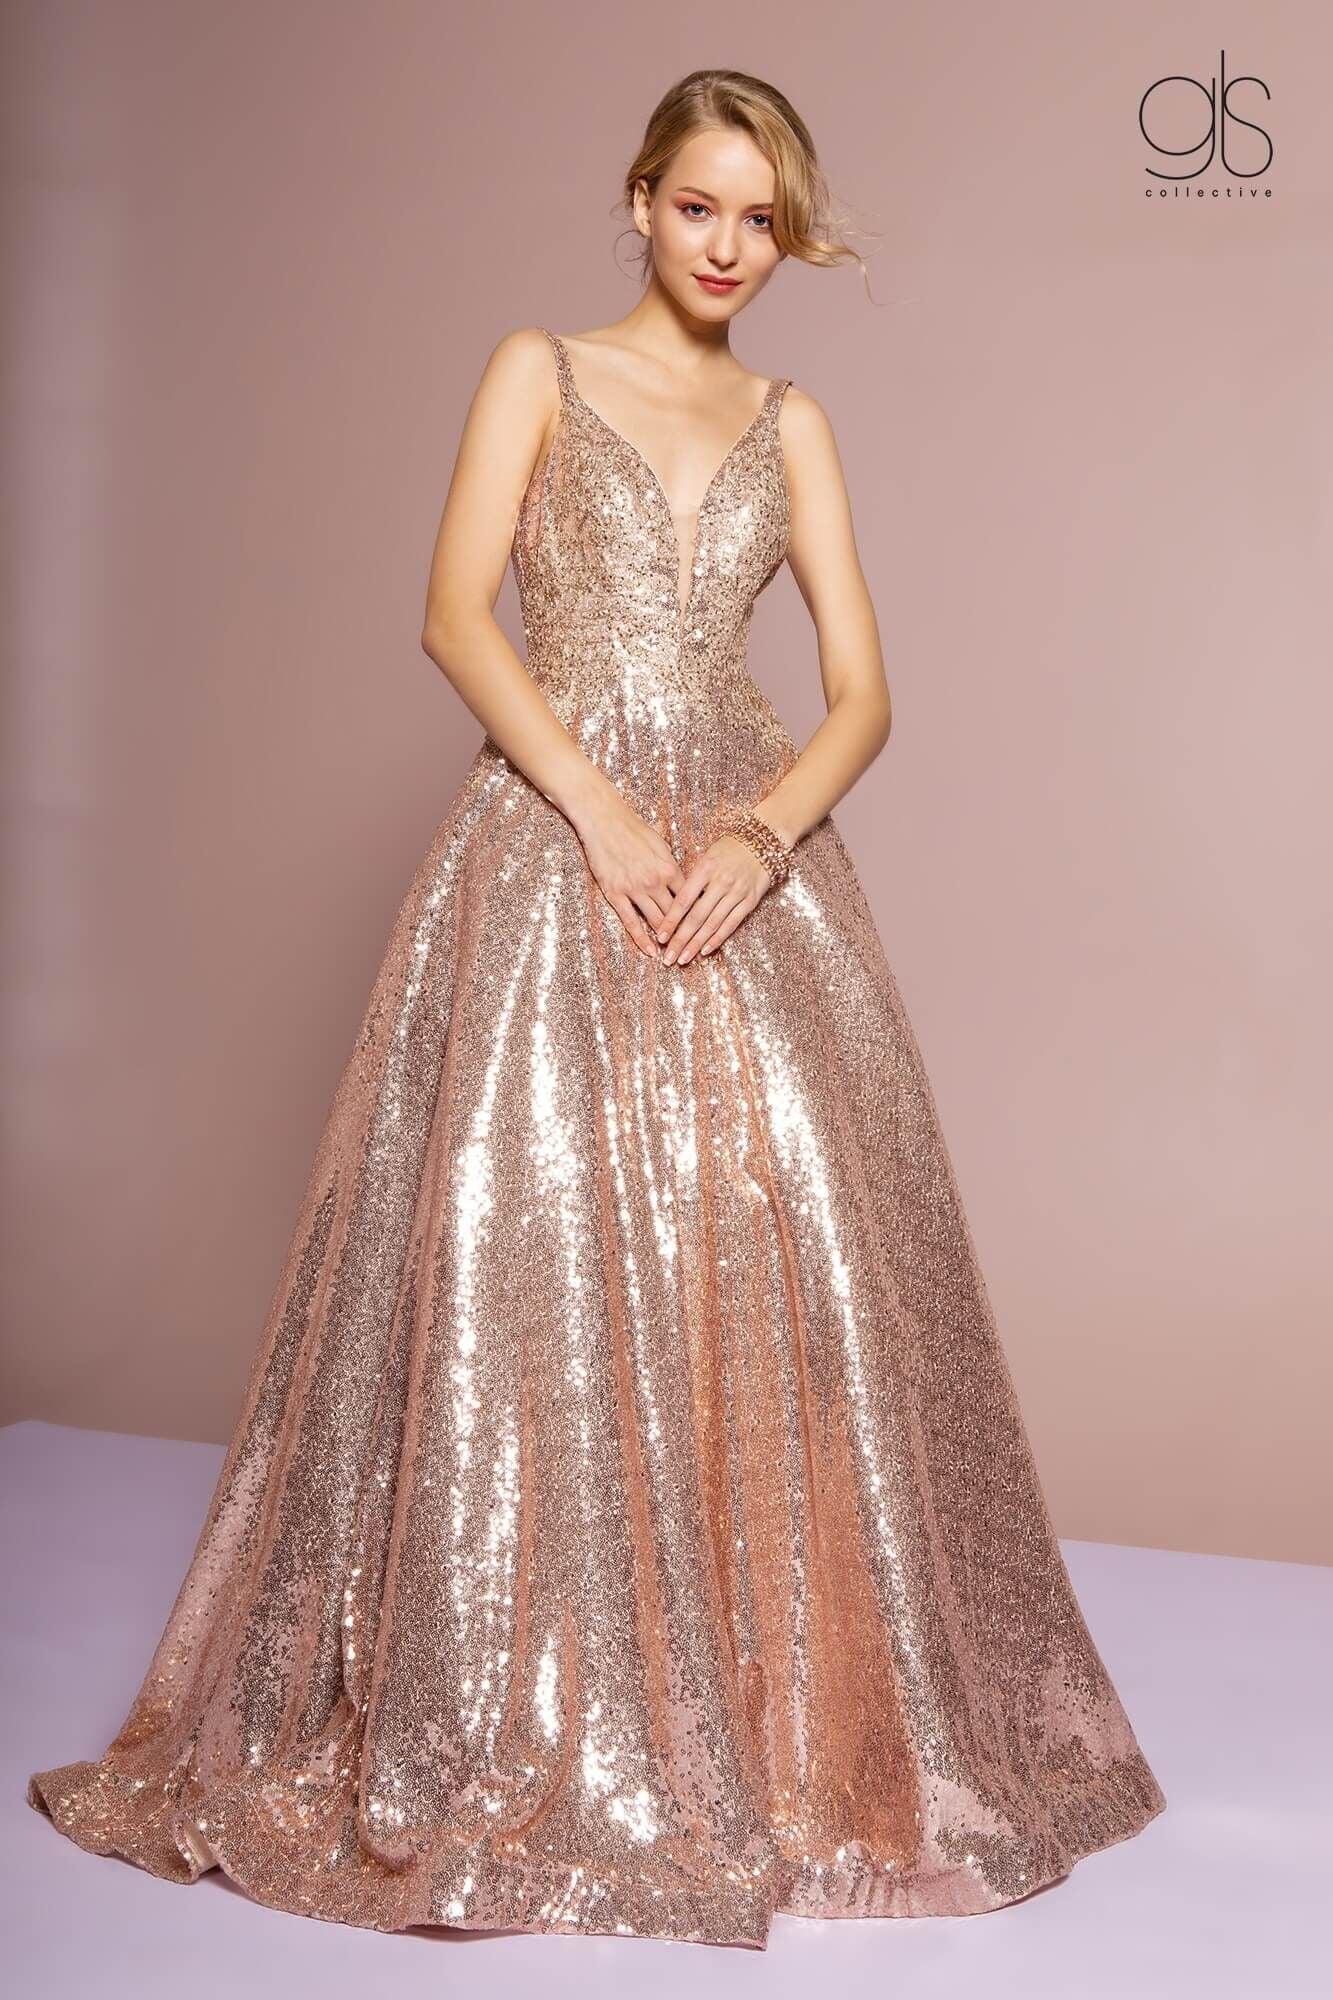 Long Prom Dress Sleeveless Sequins Ball Gown - The Dress Outlet Elizabeth K